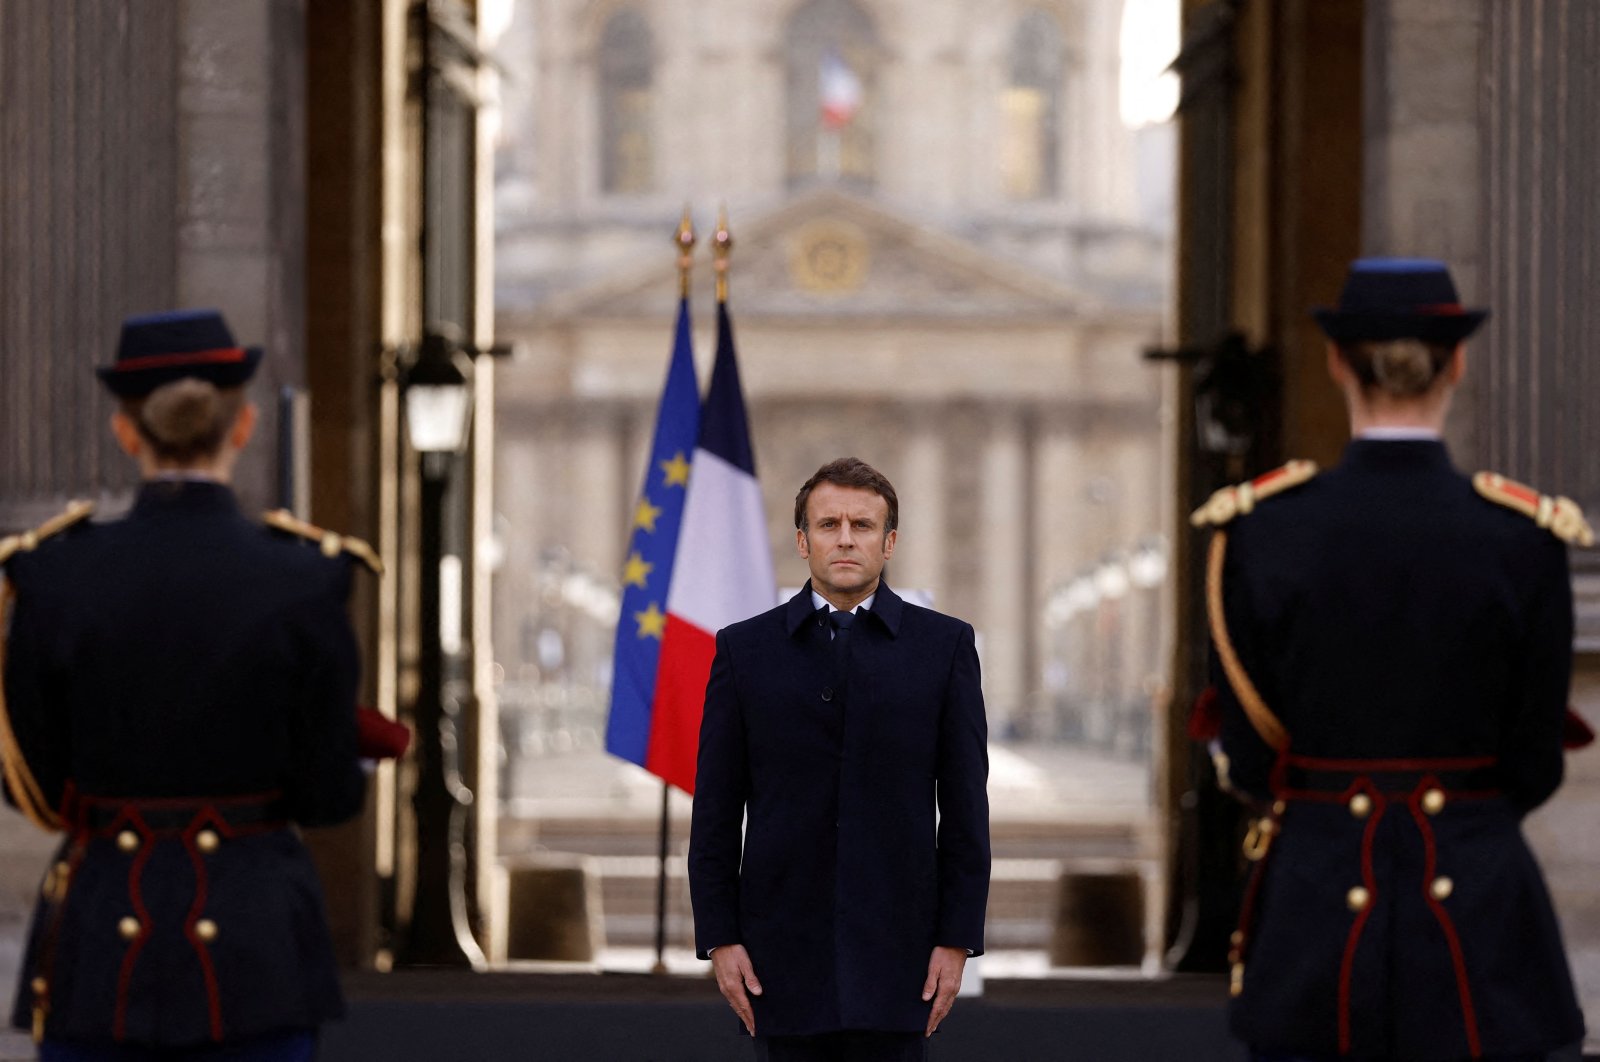 French President Emmanuel Macron stands in front of the coffin of late French abstract painter Pierre Soulages during a tribute ceremony at the Cour Carrée of the Louvre museum in Paris, France, Nov. 2, 2022. (AFP Photo)